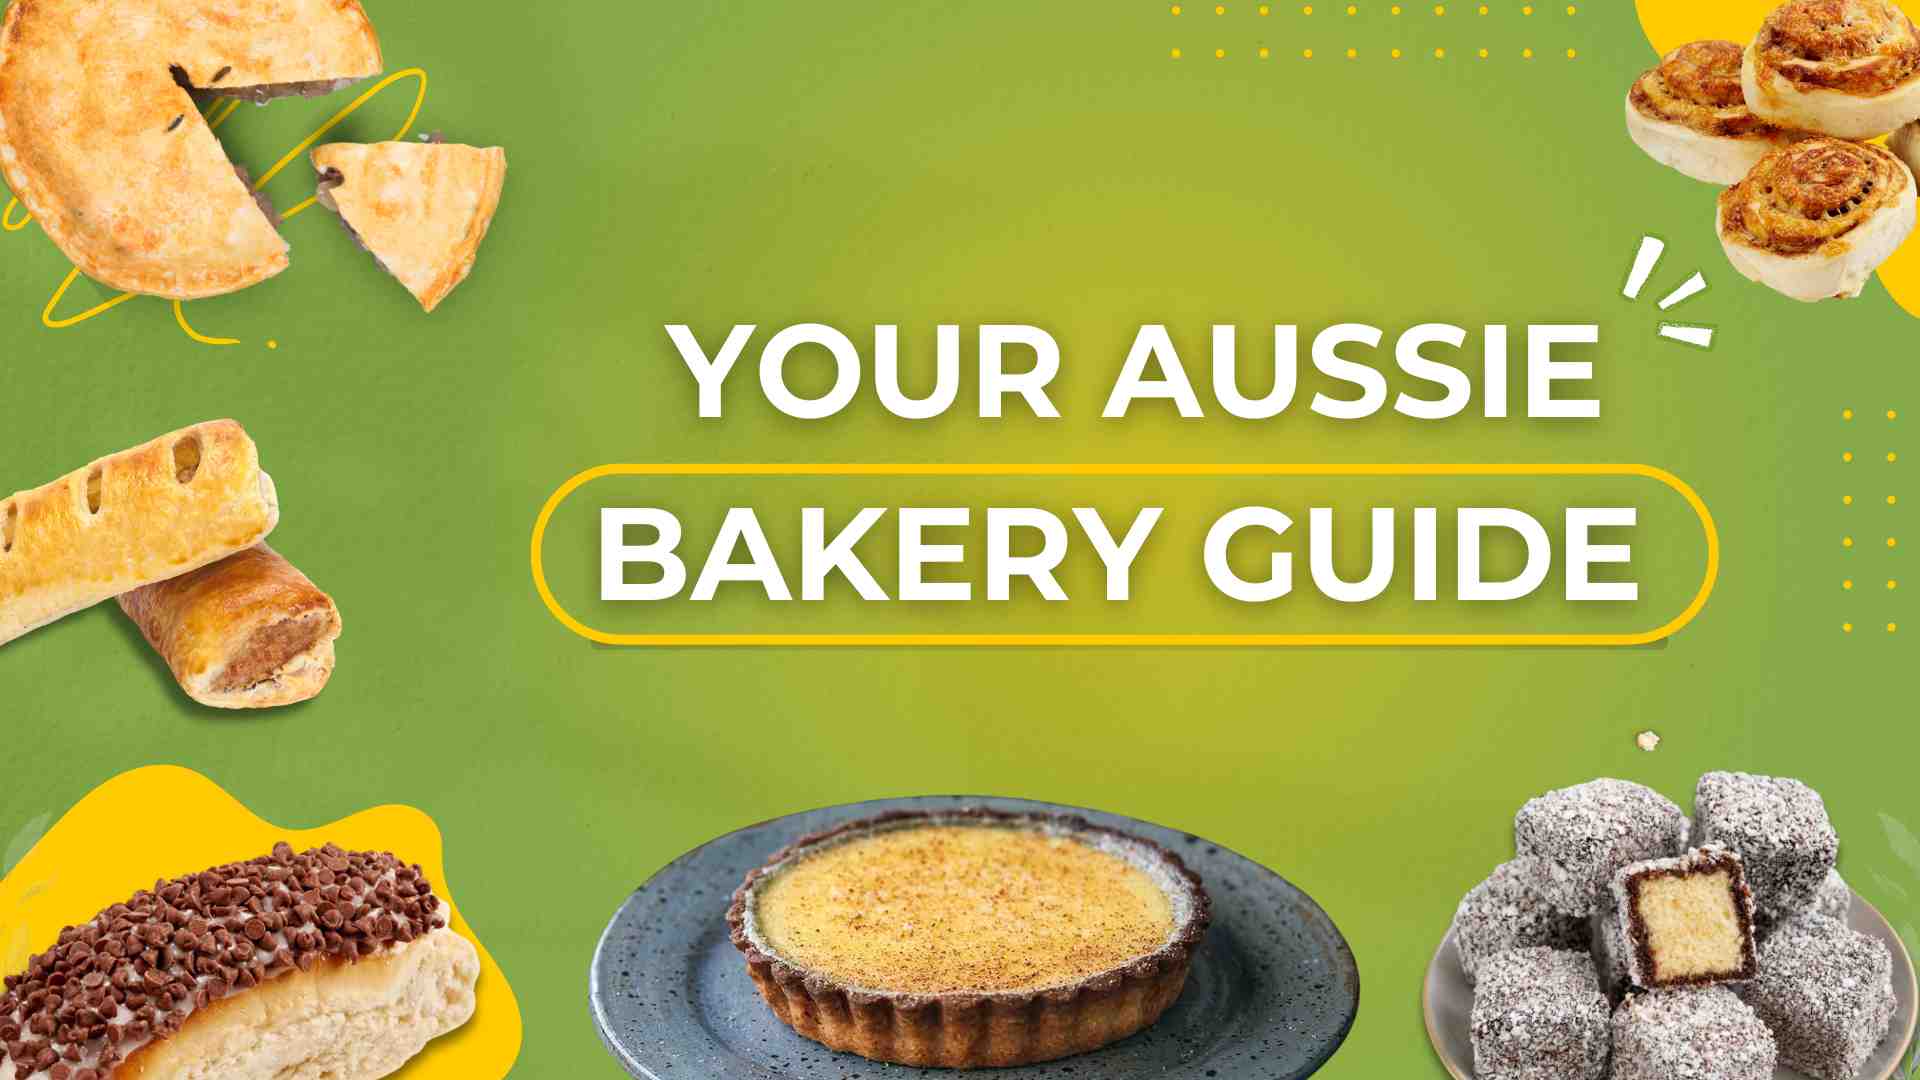 Your Aussie Bakery Guide